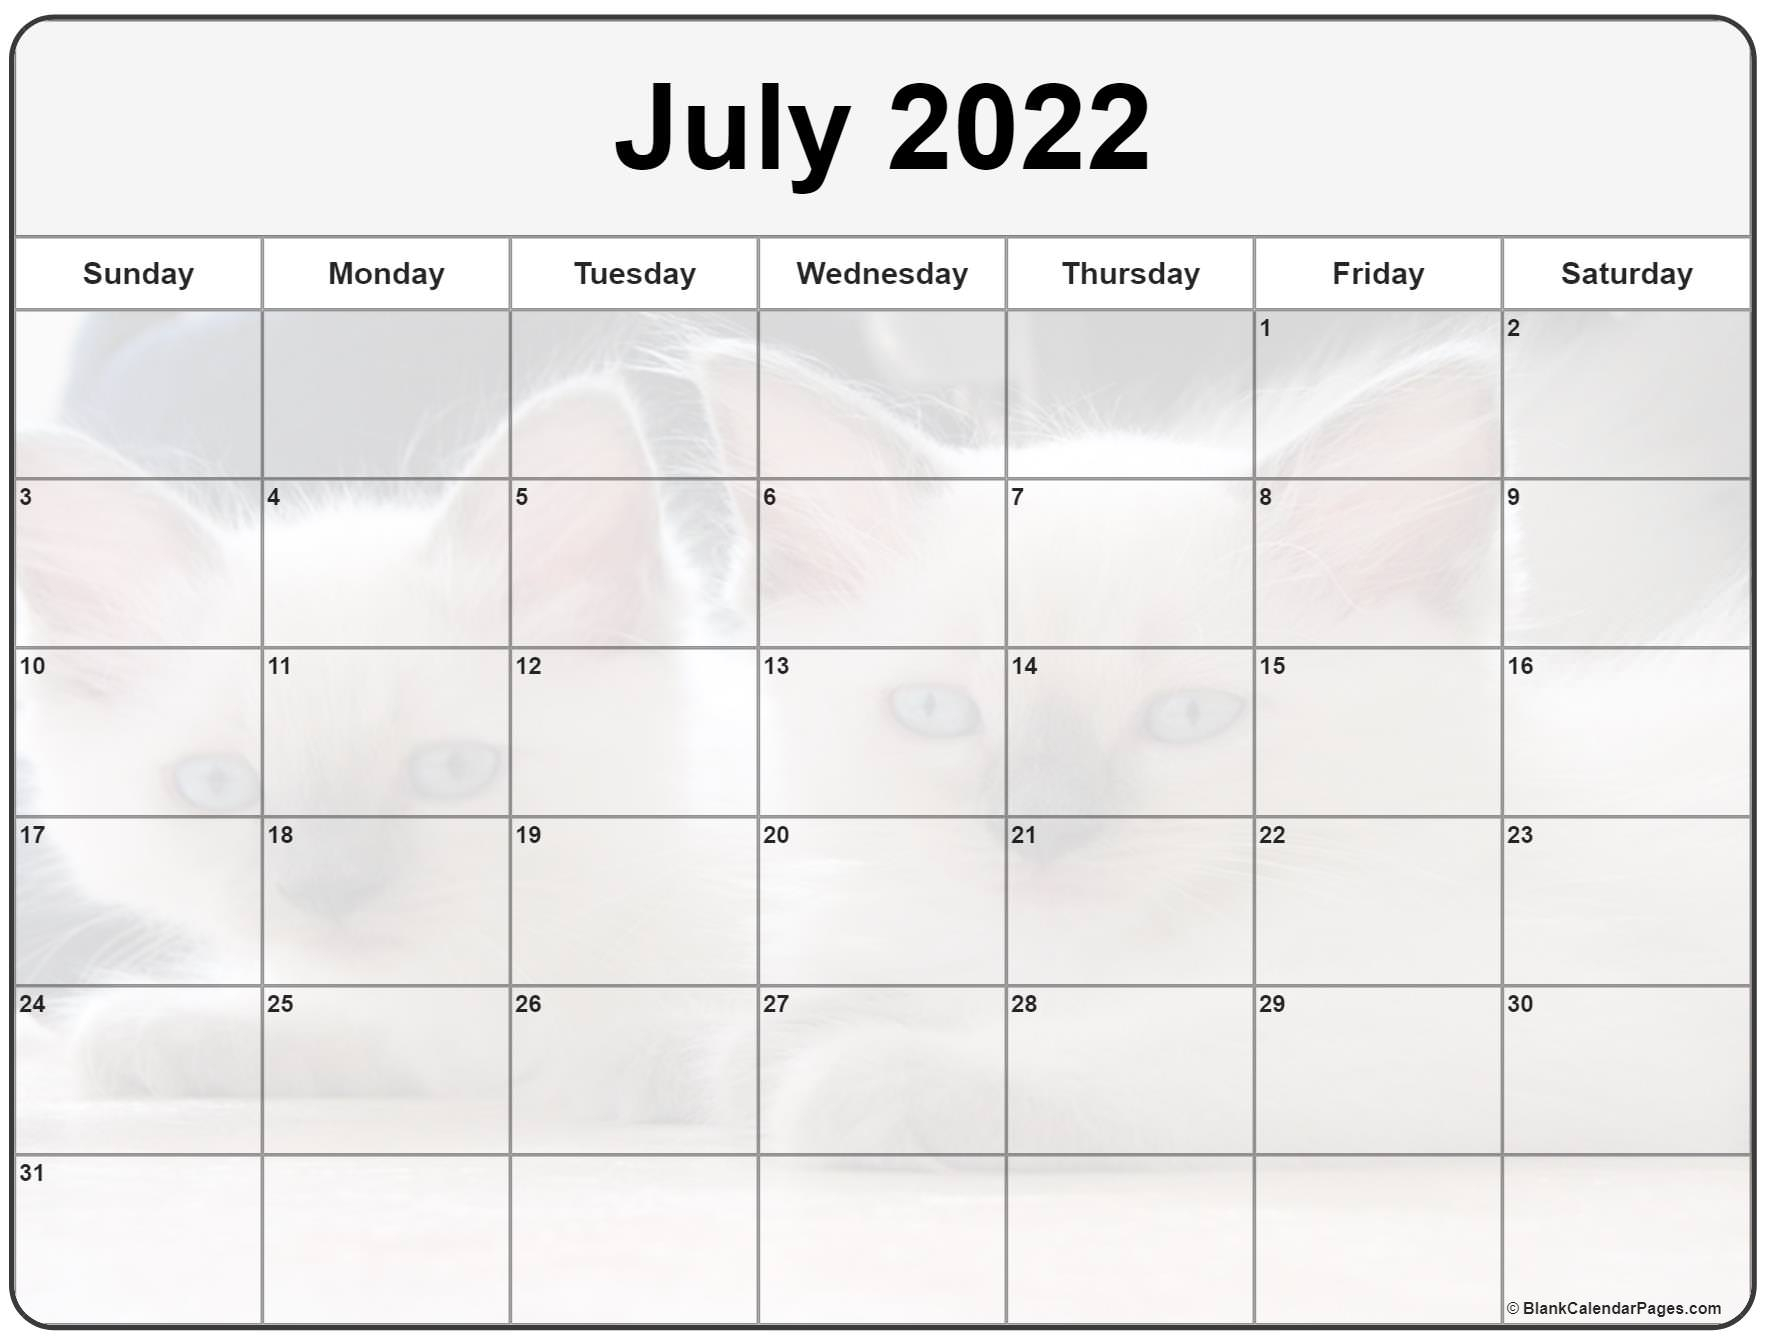 Collection Of July 2022 Photo Calendars With Image Filters.